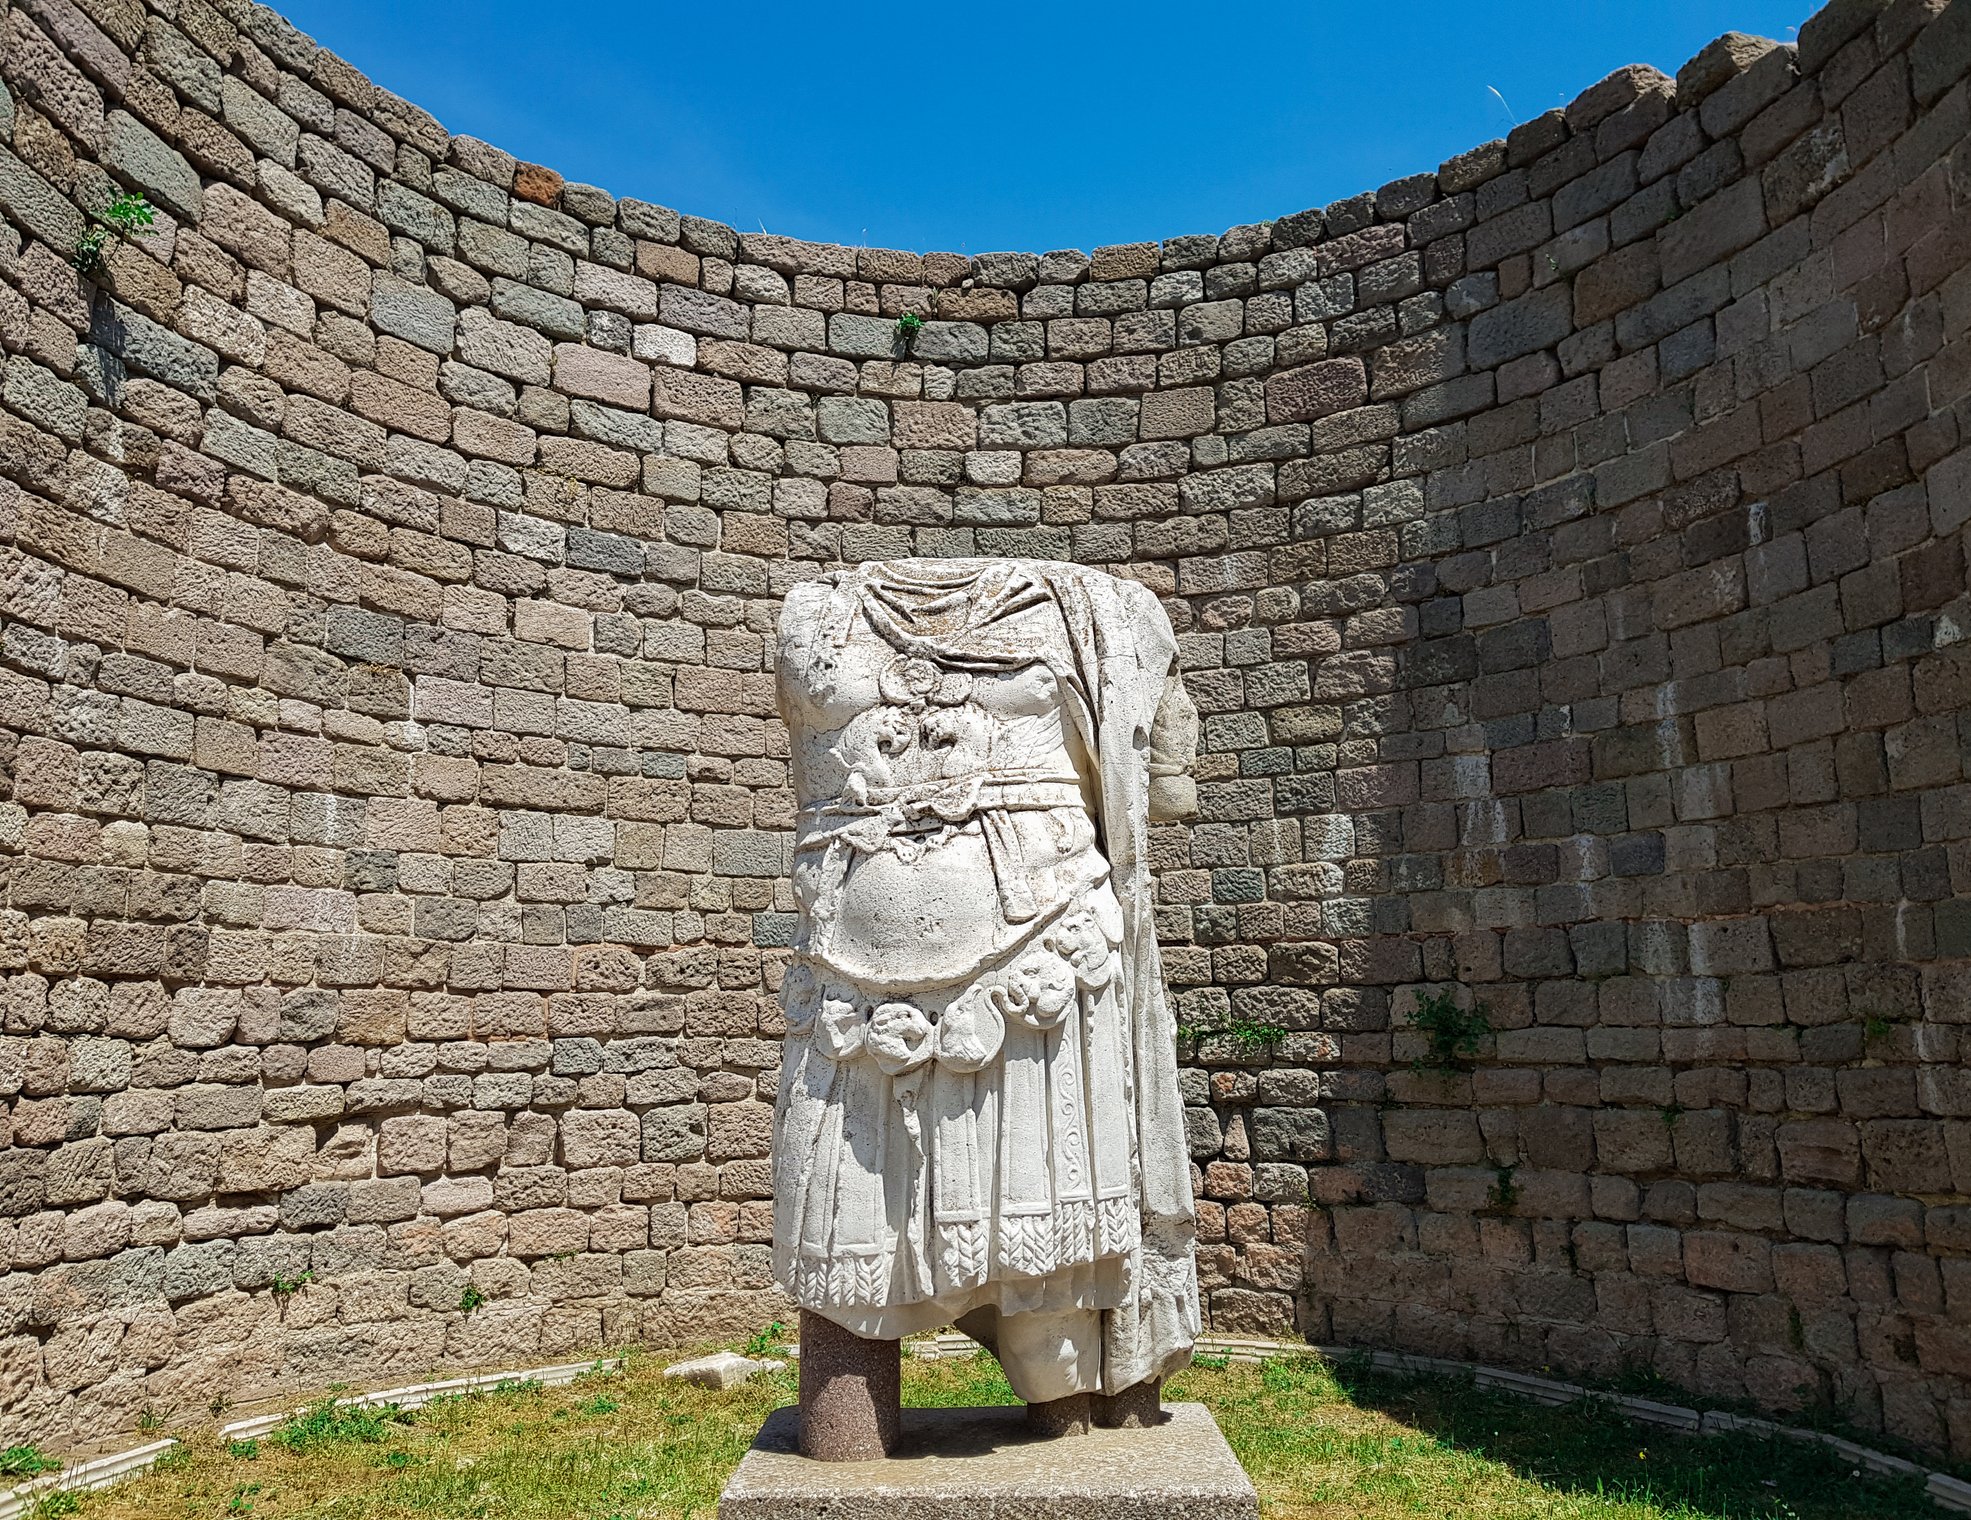 A headless armored statue of Trajan can be seen at the Temple of Trajan, in Pergamon. (iStock Photo / Servet Turan)